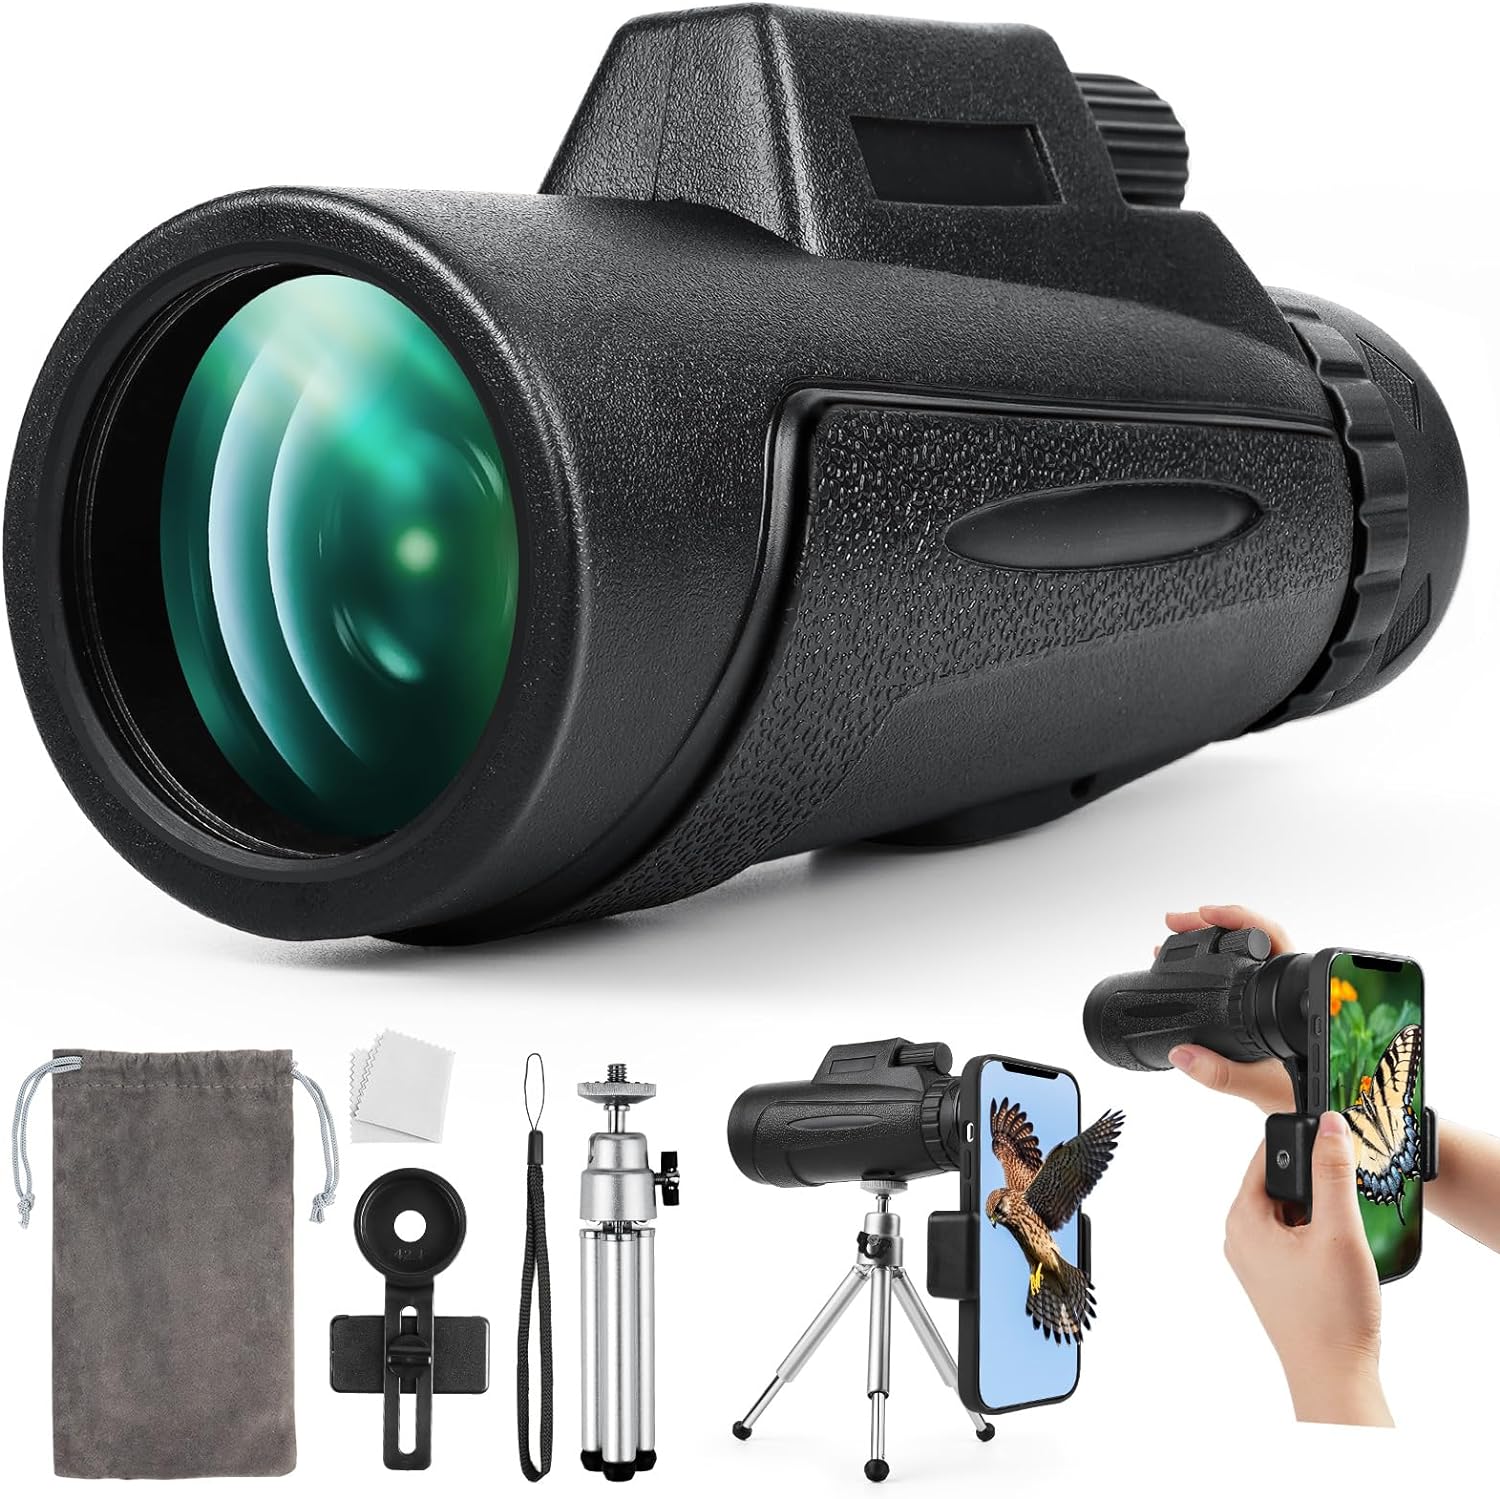 12x50 HD Monocular Telescope for Smartphone, Monoculars for Adults High Powered with Bak4 Prism and Fmc Lens, Low Night Vision for Bird Watching/Hunting/Wildlife/Hiking/Traveling - Space Black